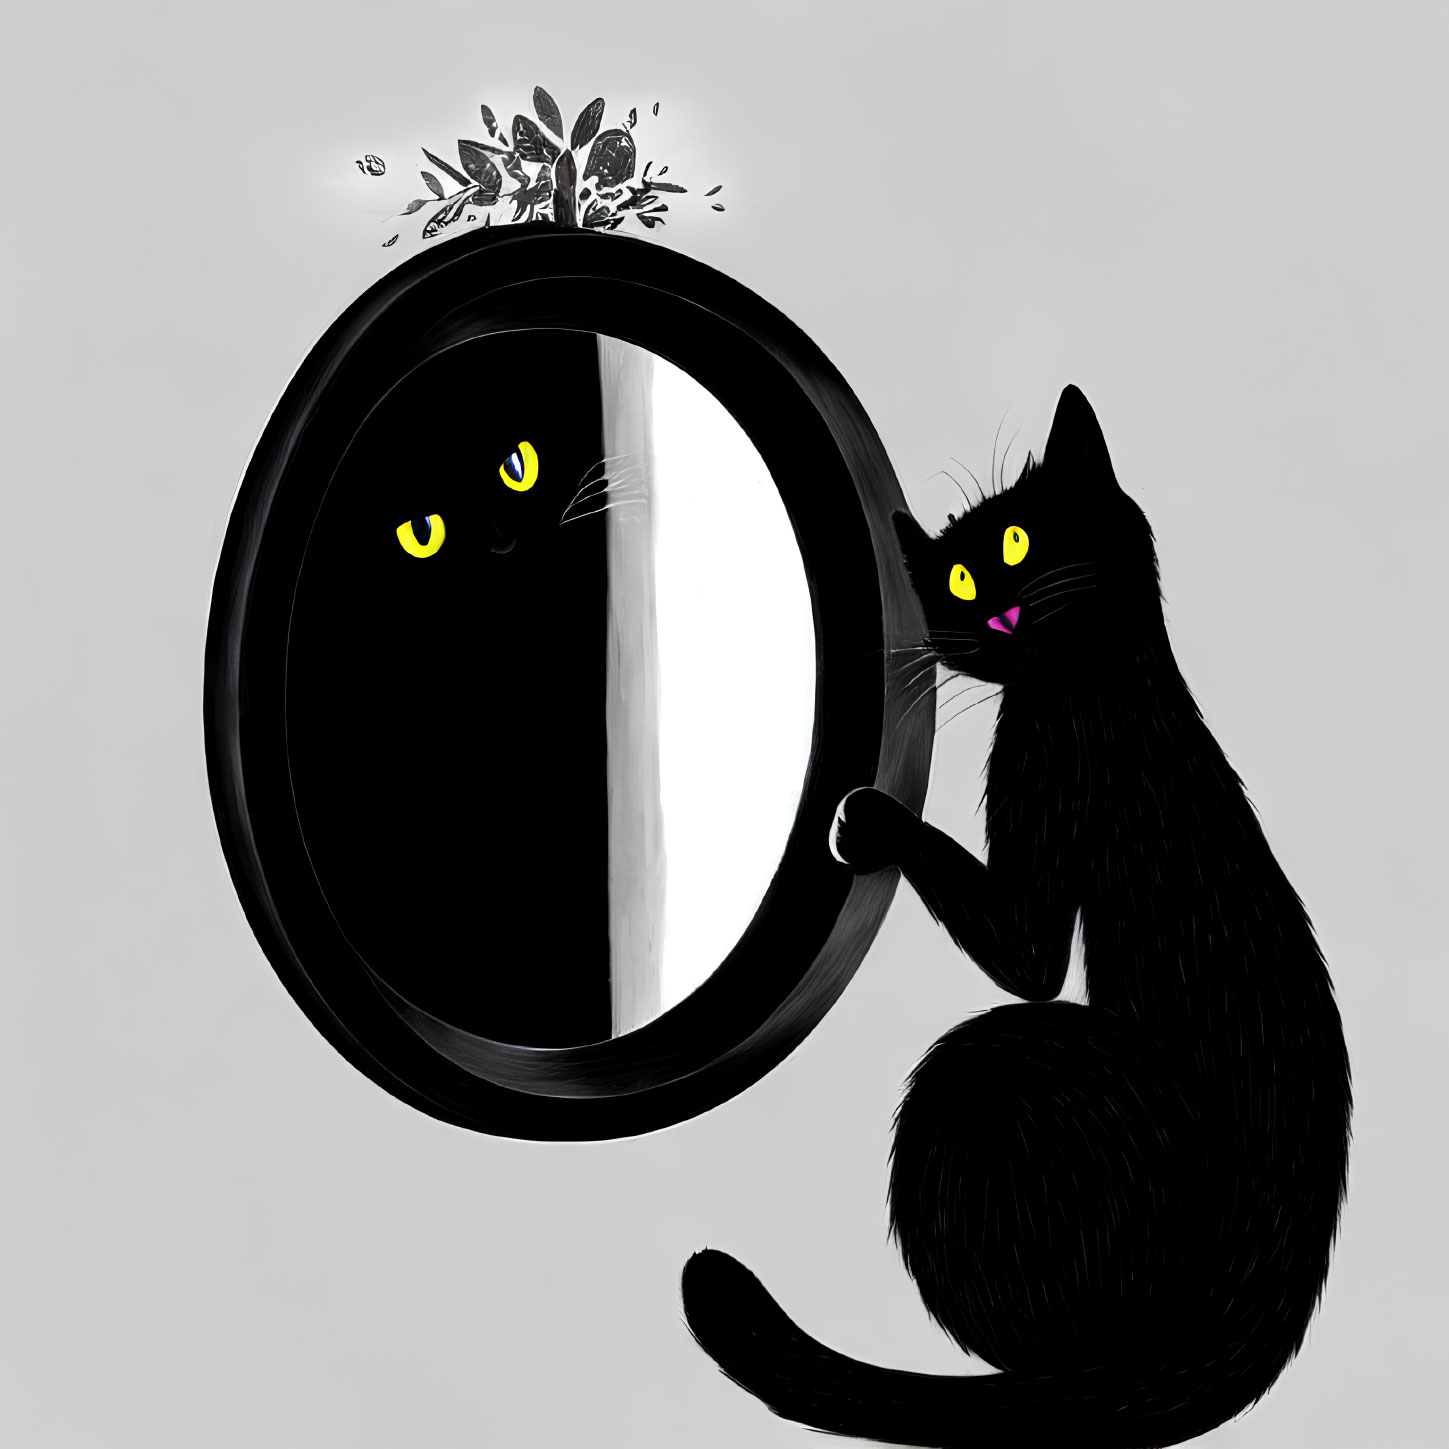 Black Cat with Yellow Eyes Gazing at Reflection in Round Mirror